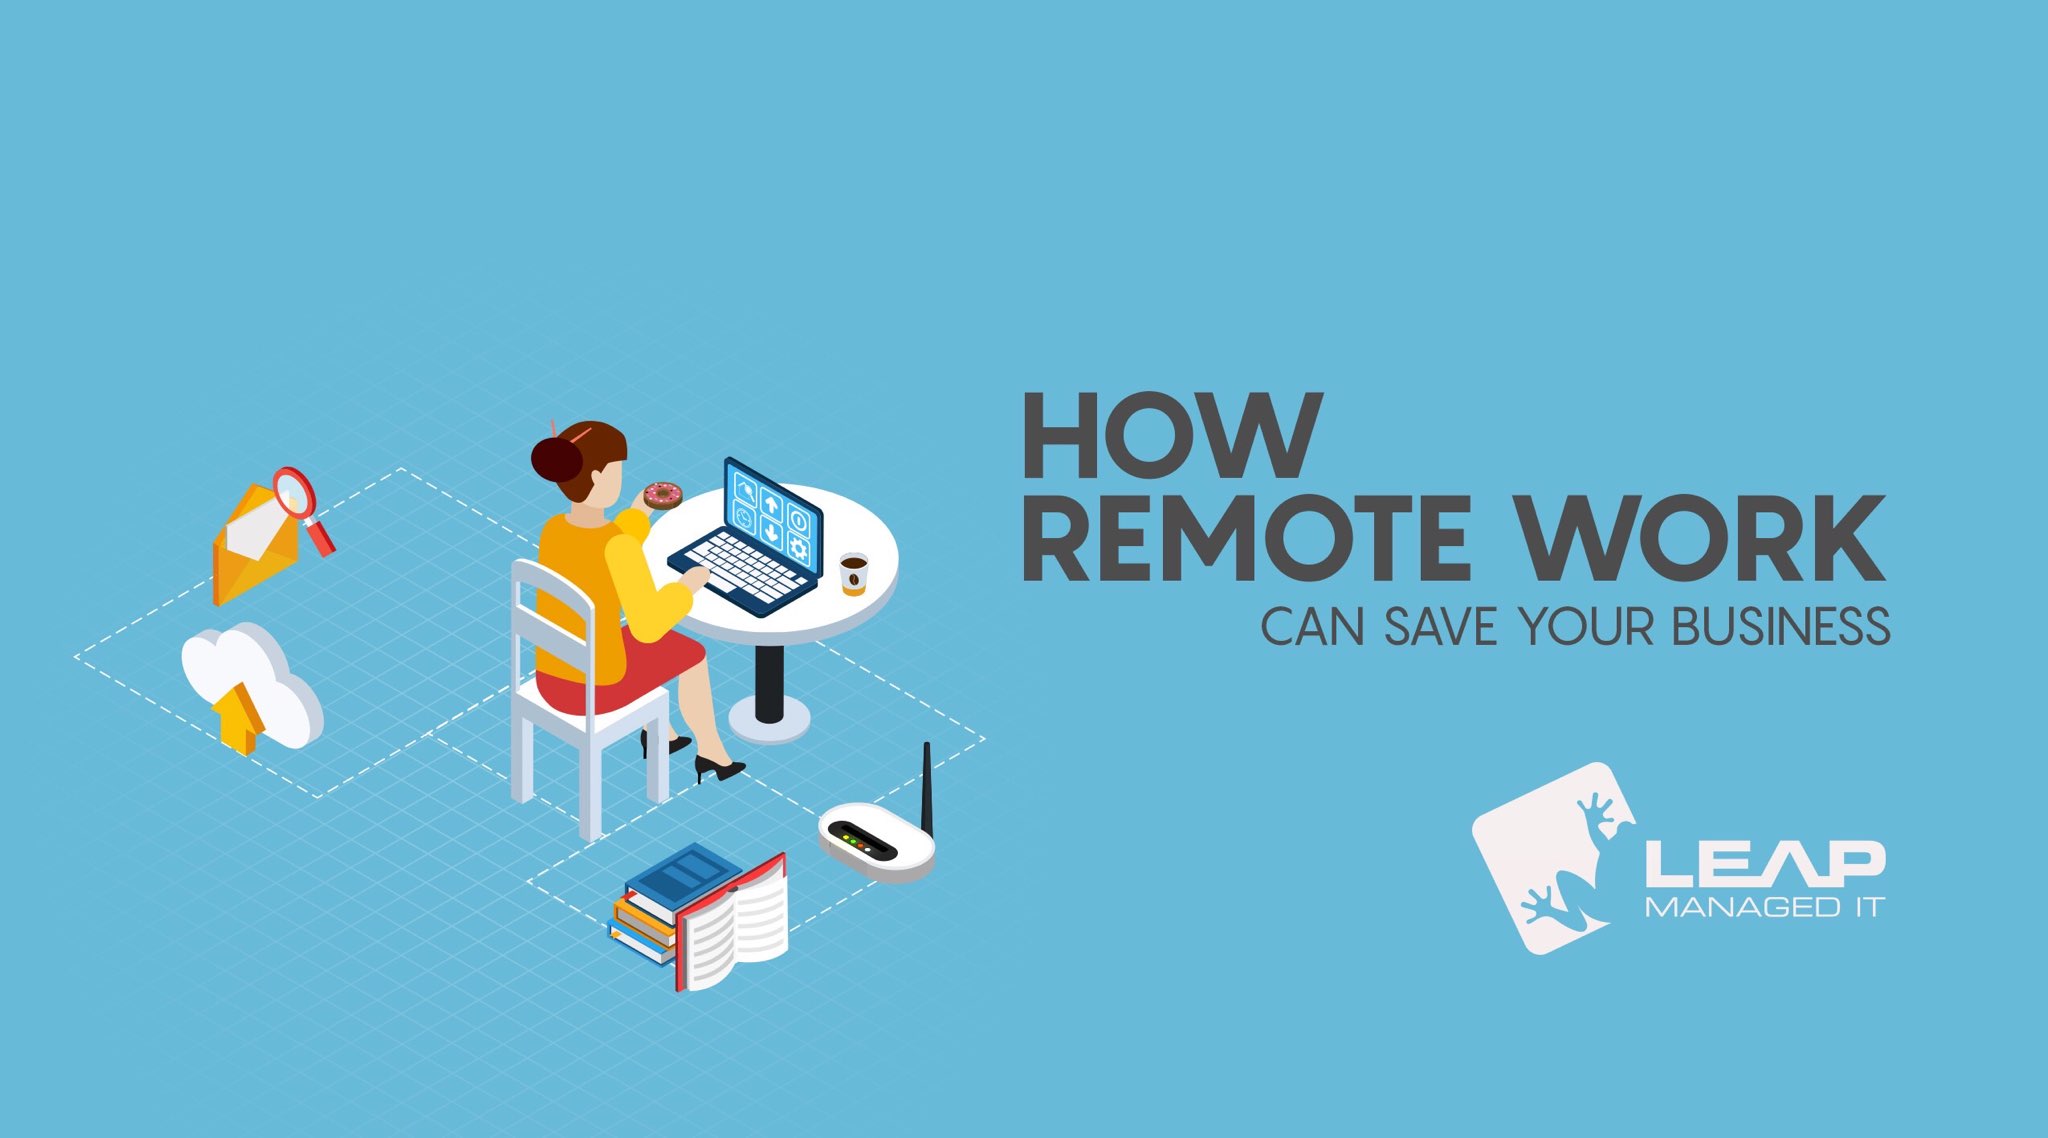 How Remote Work can Save your Business